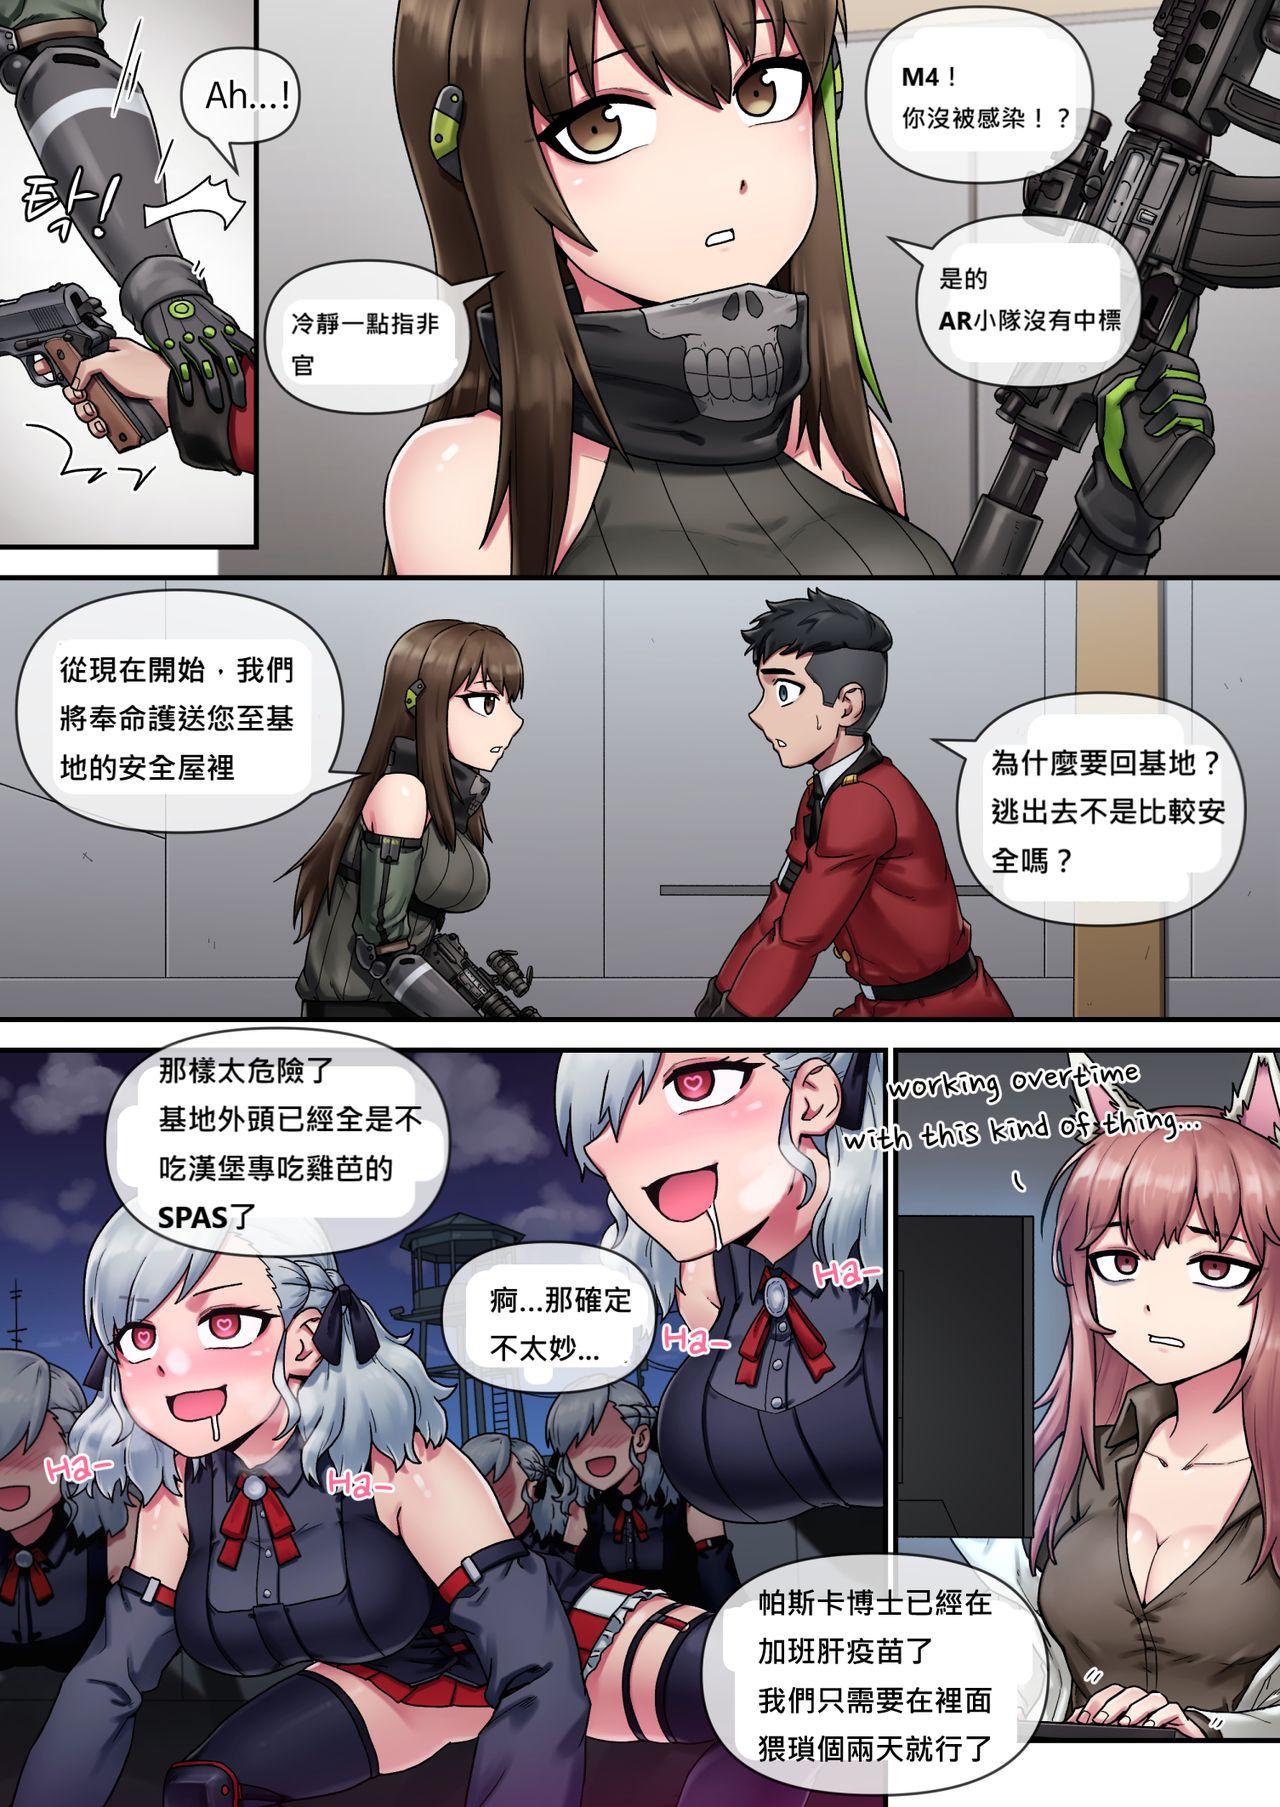 Class Room My Only Princess - Girls frontline Stepsiblings - Page 4